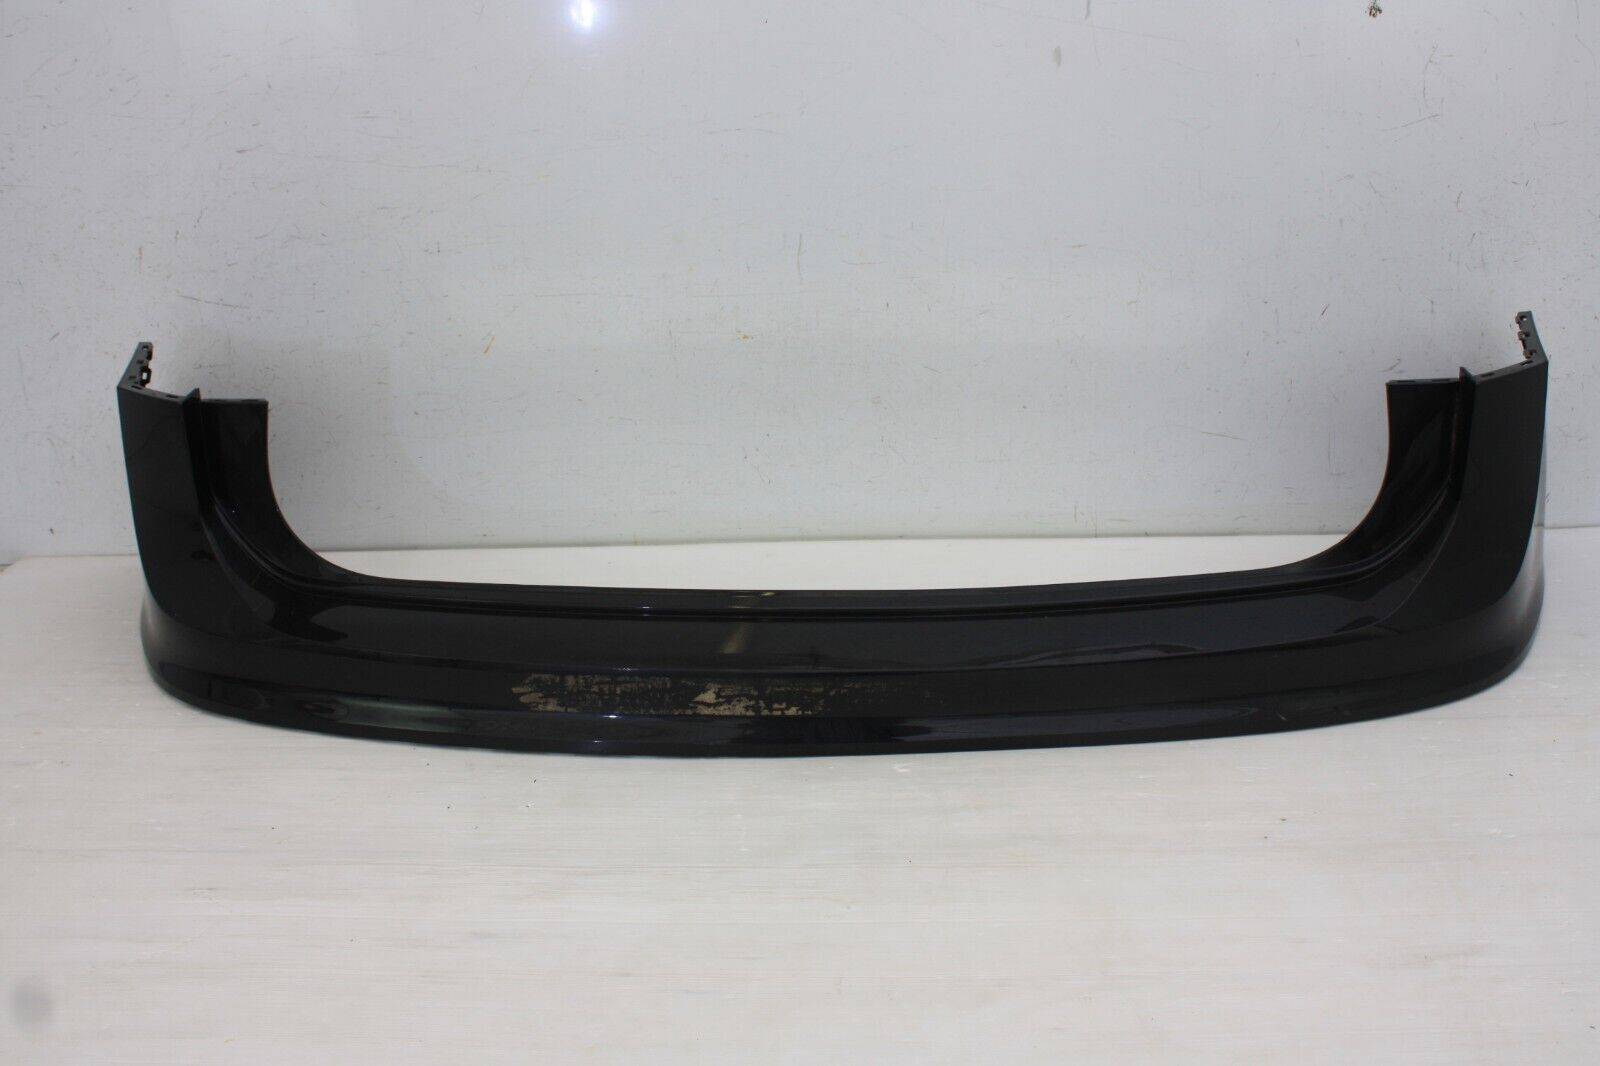 VW Tiguan Rear Bumper Upper Section 2016 TO 2020 5NA807417 Genuine 175690392914